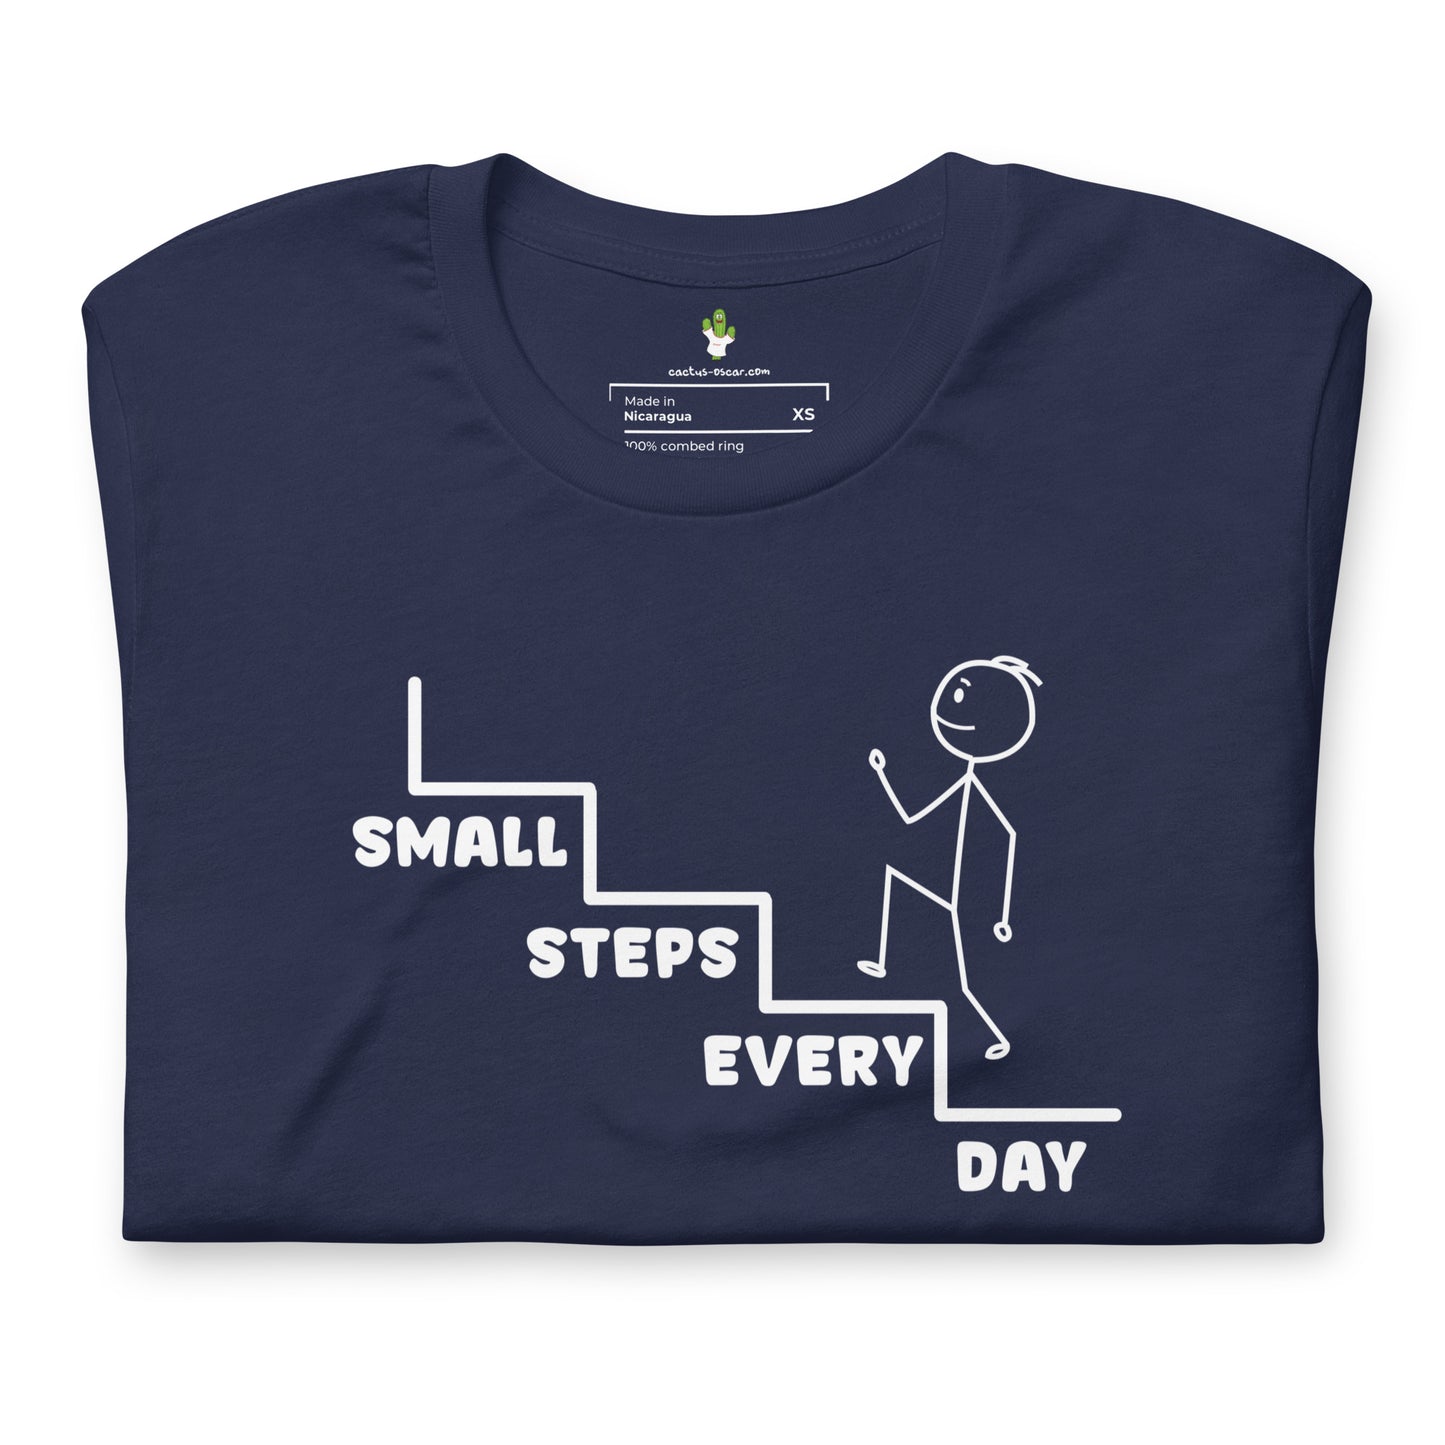 Unisex T-shirt "Small steps every day" with a man